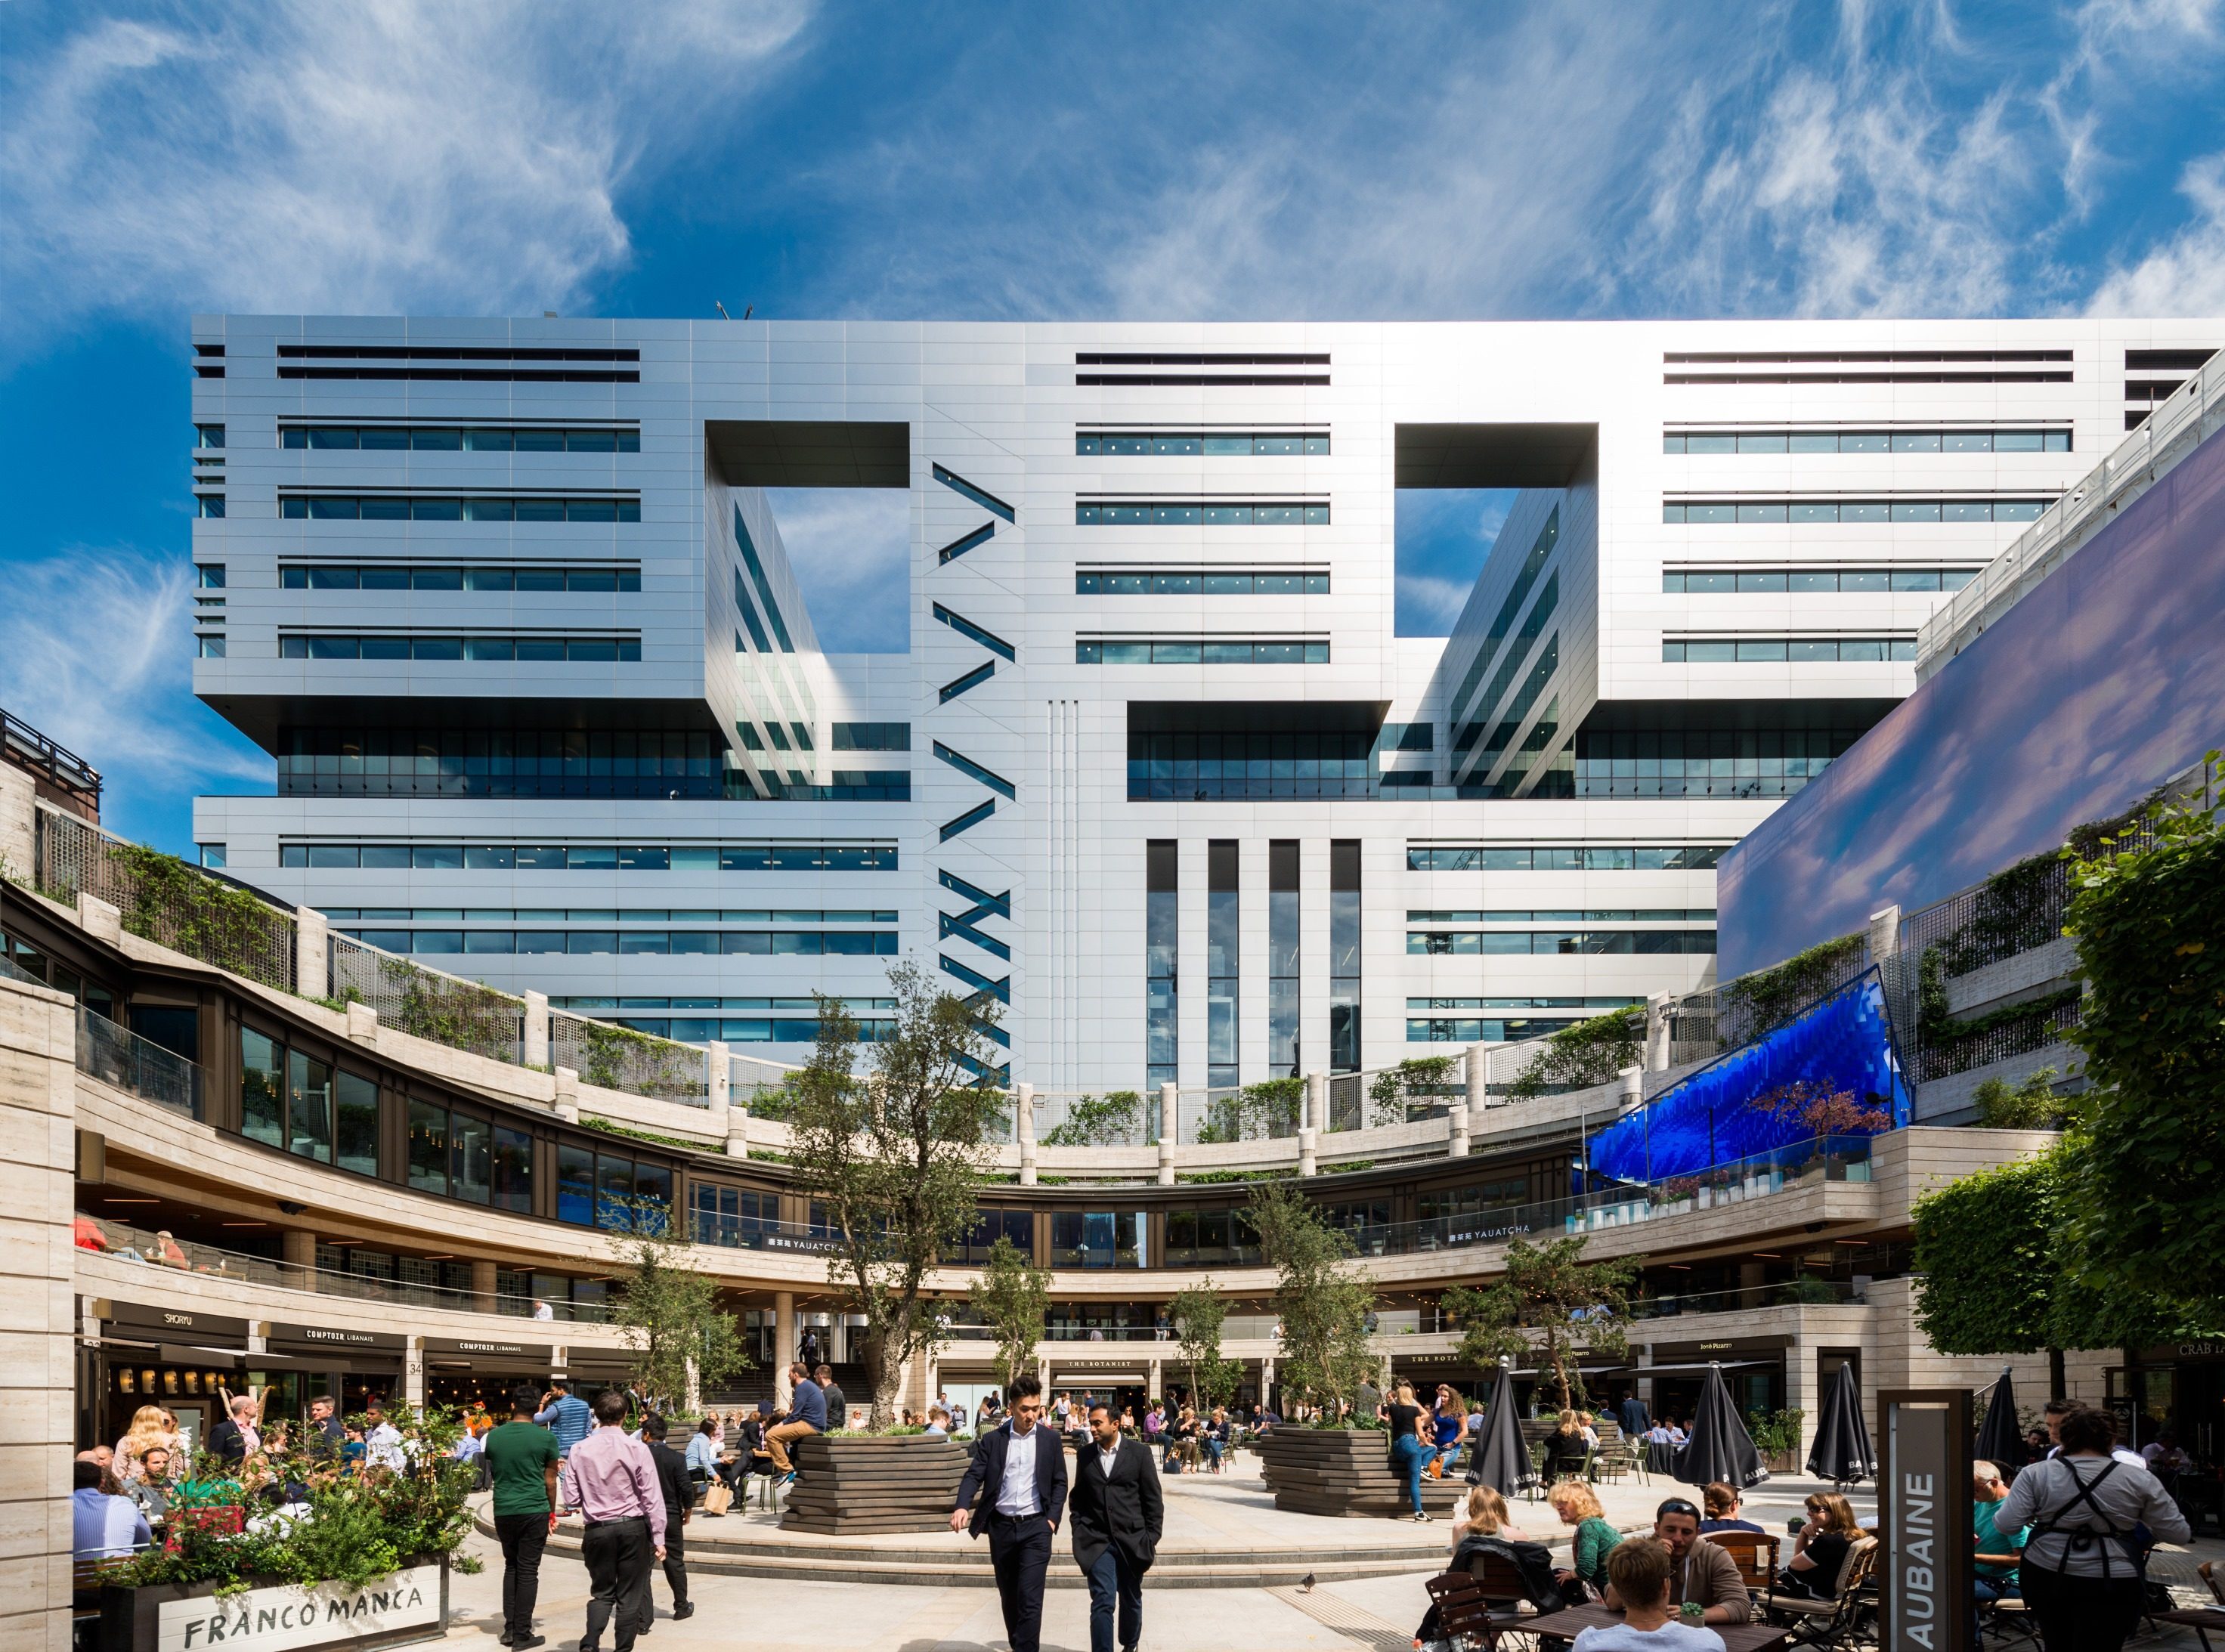 CK Asset on Friday said that it had sold the 5 Broadgate office building next to Liverpool Street railway station in London. Photo: Handout